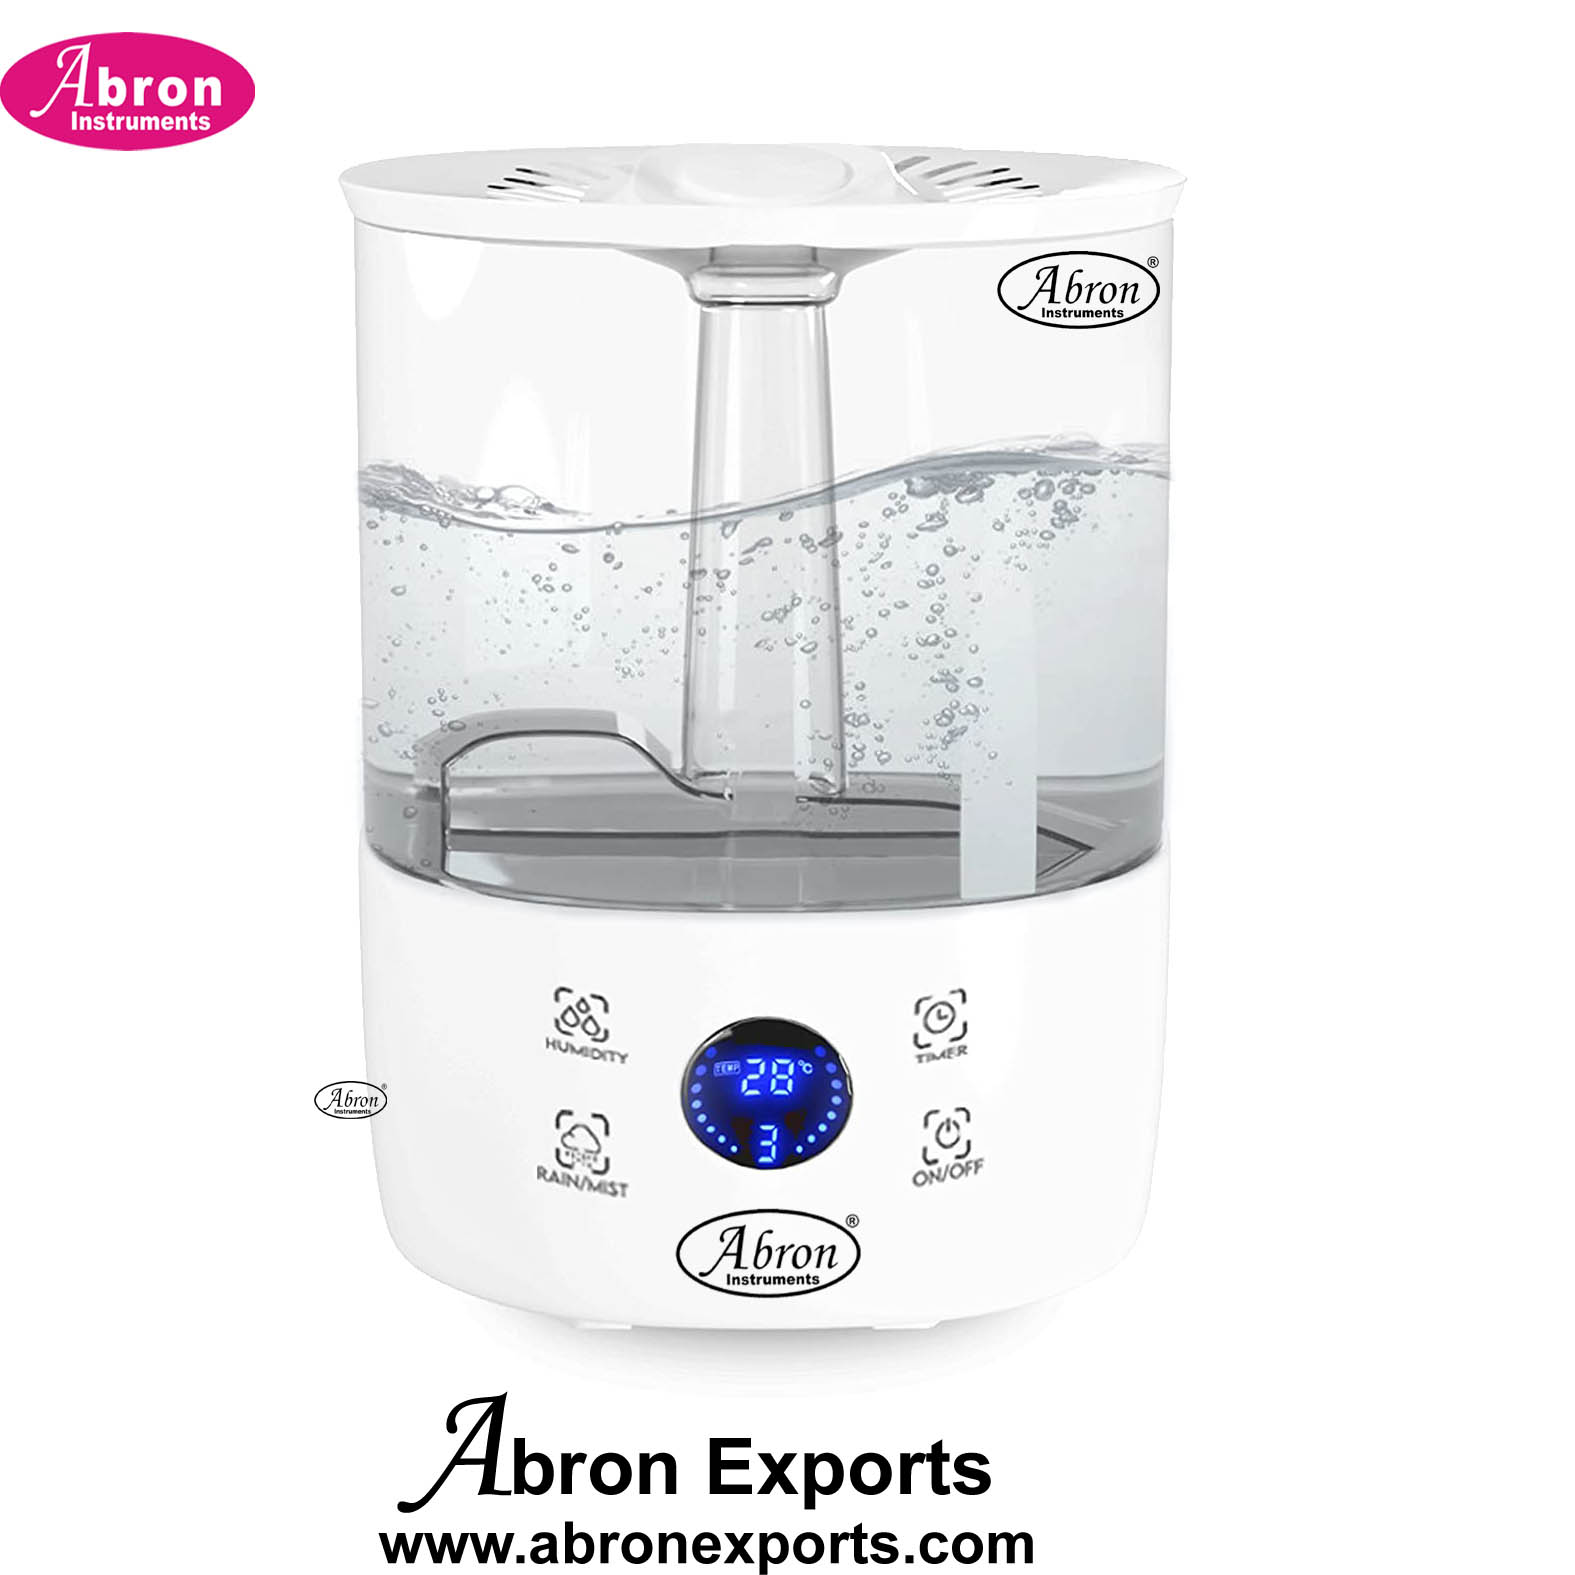 Humidifier with Digital Display Lifelong 4.5Liter Top Fill Room-for Office-works-Abron 220v ABM-2946HF4D